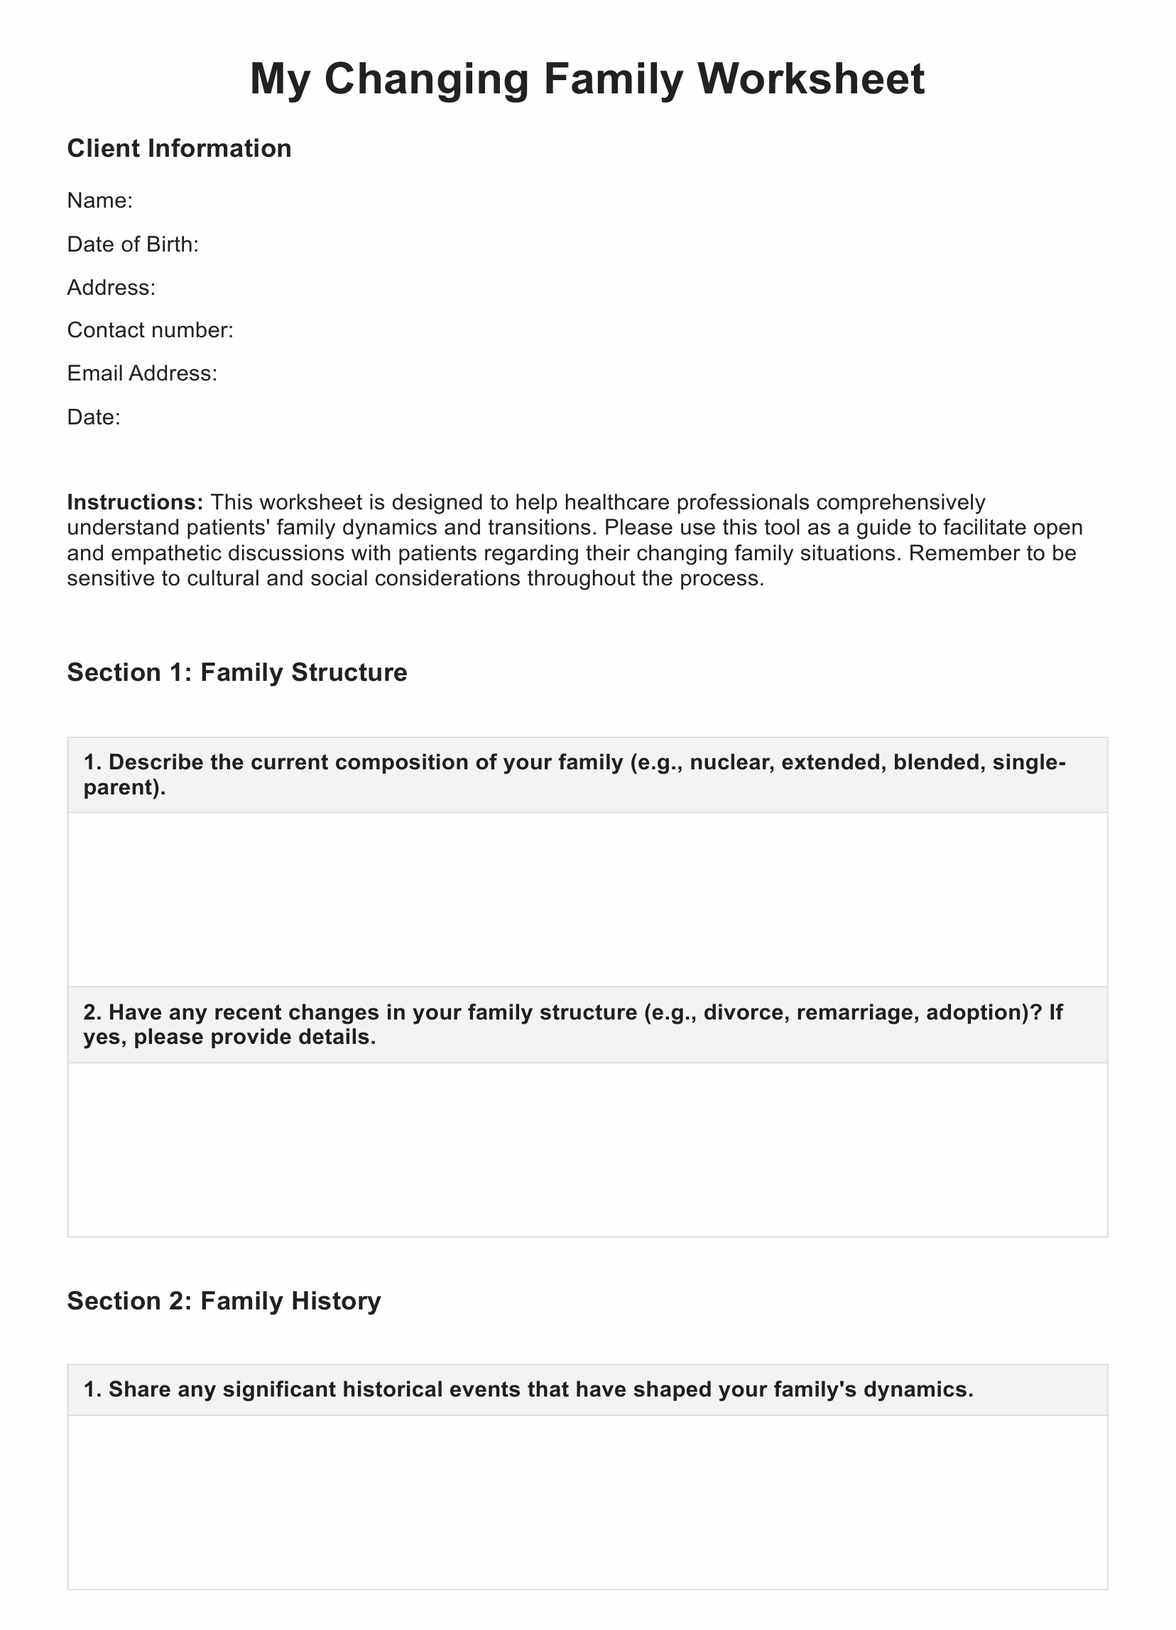 My Changing Family Worksheets PDF Example